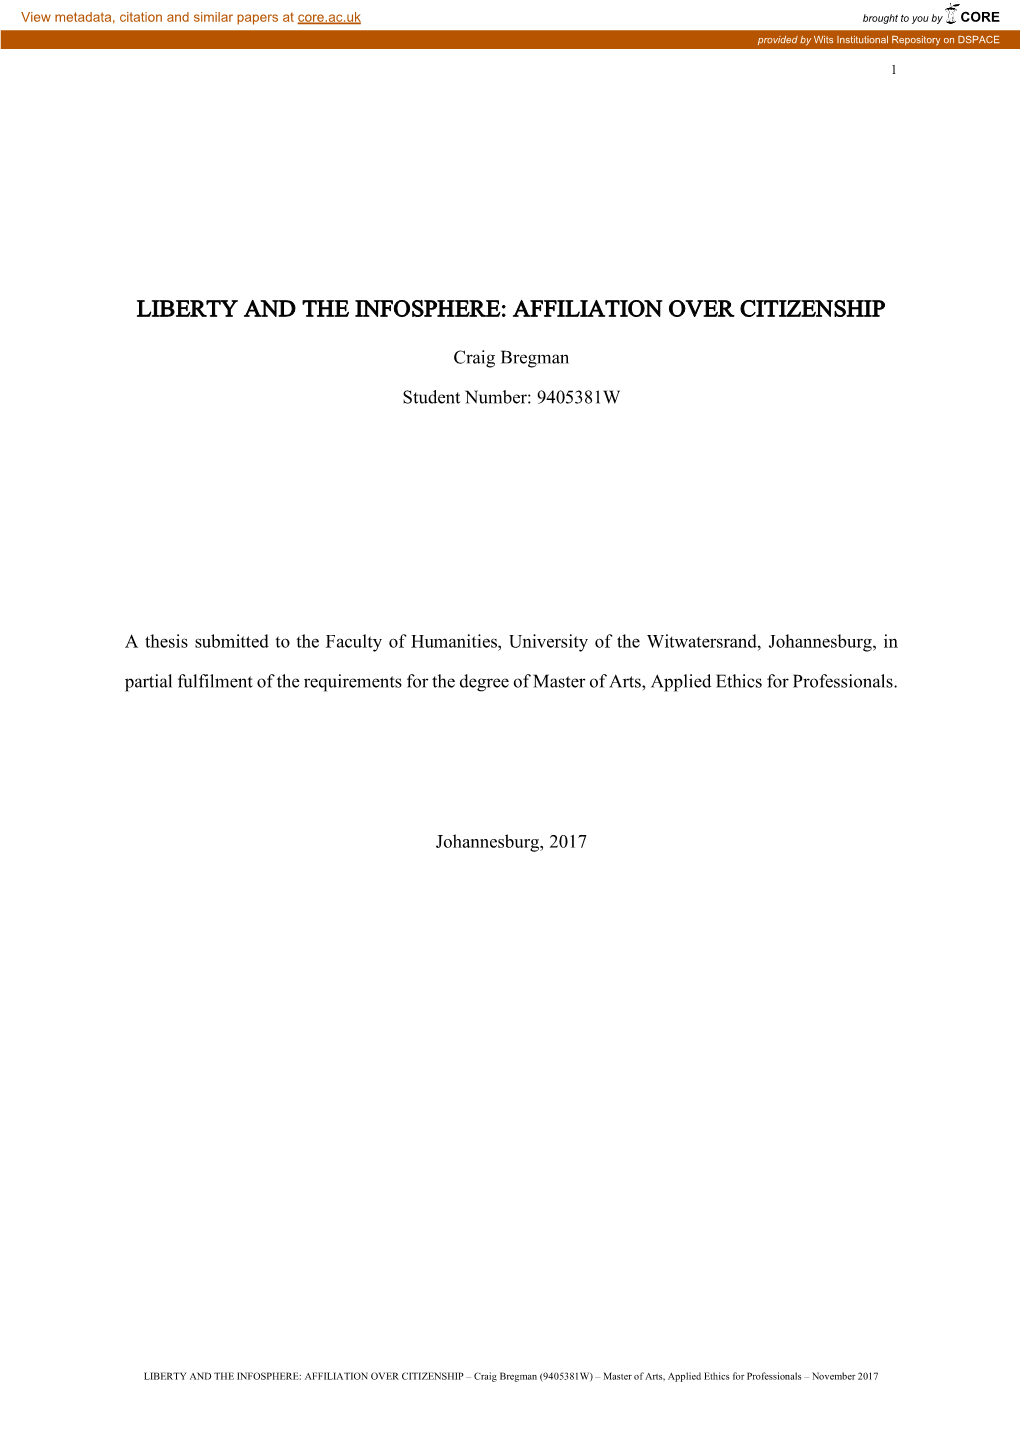 Liberty and the Infosphere: Affiliation Over Citizenship